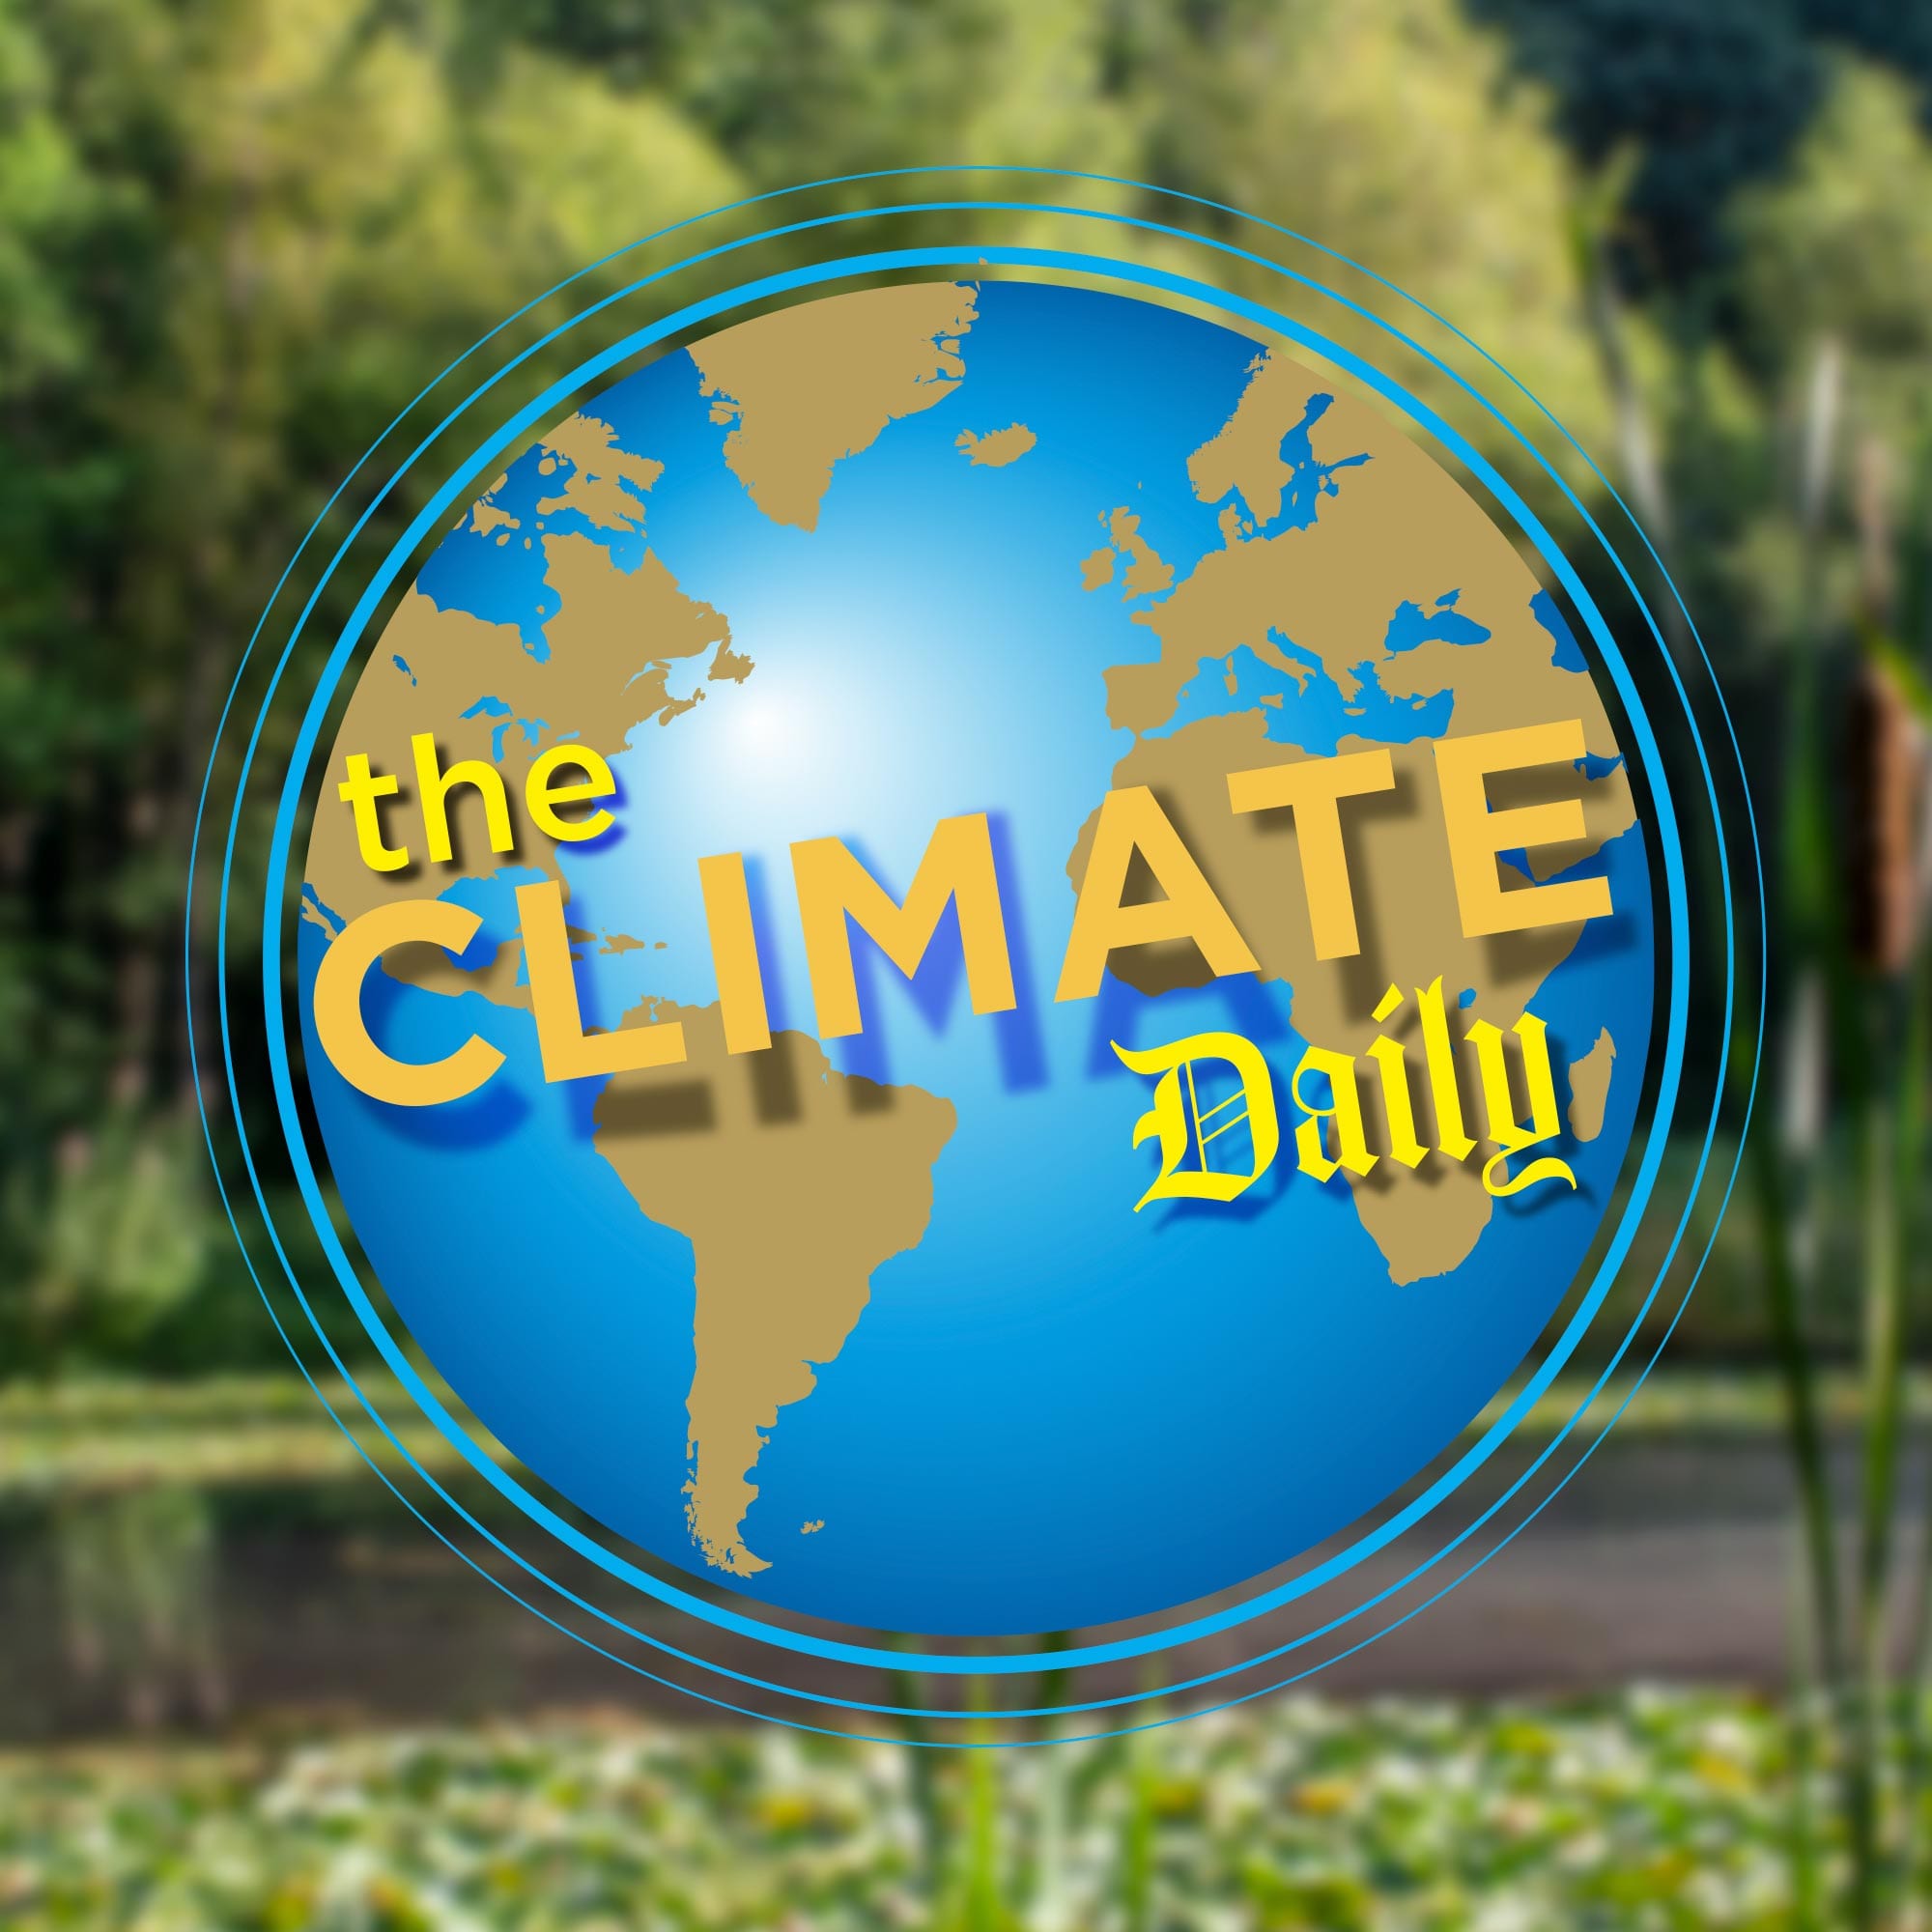 Climate Crusader–Pinar Sinopoulos-Lloyd, National Endangered Species Day, The Climate Daily Crowdfunding Reforestation Campaign!